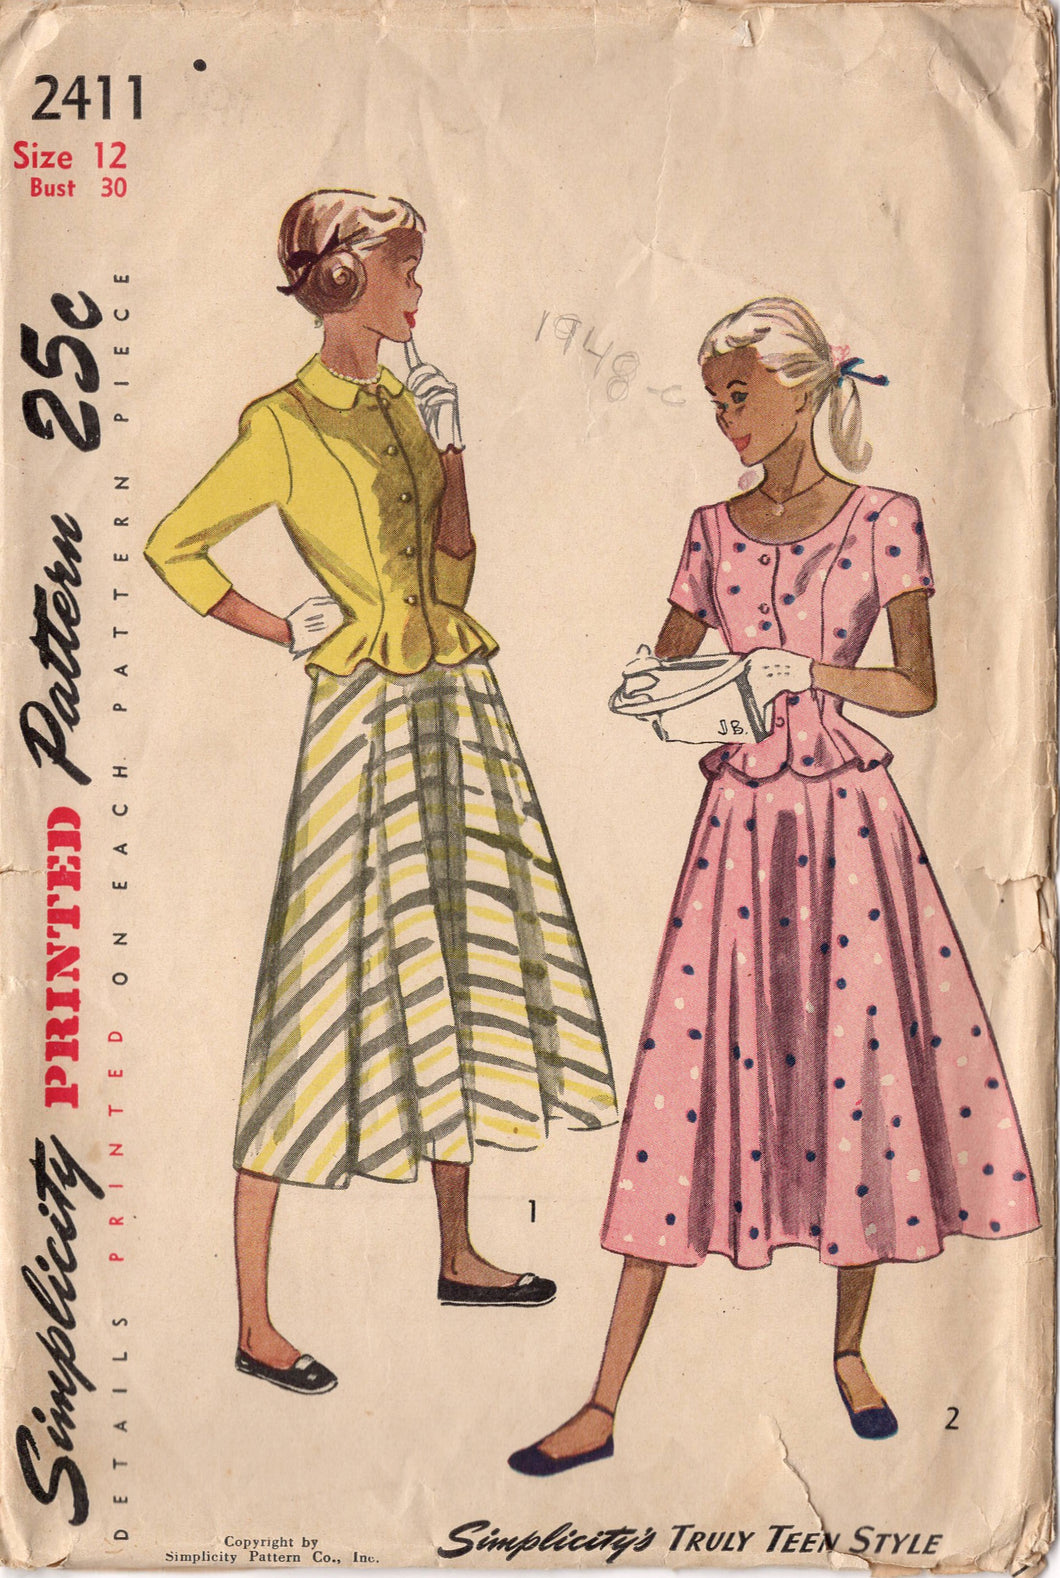 1940's Simplicity Two Piece Dress with Peplum and Flared skirt - Bust 30